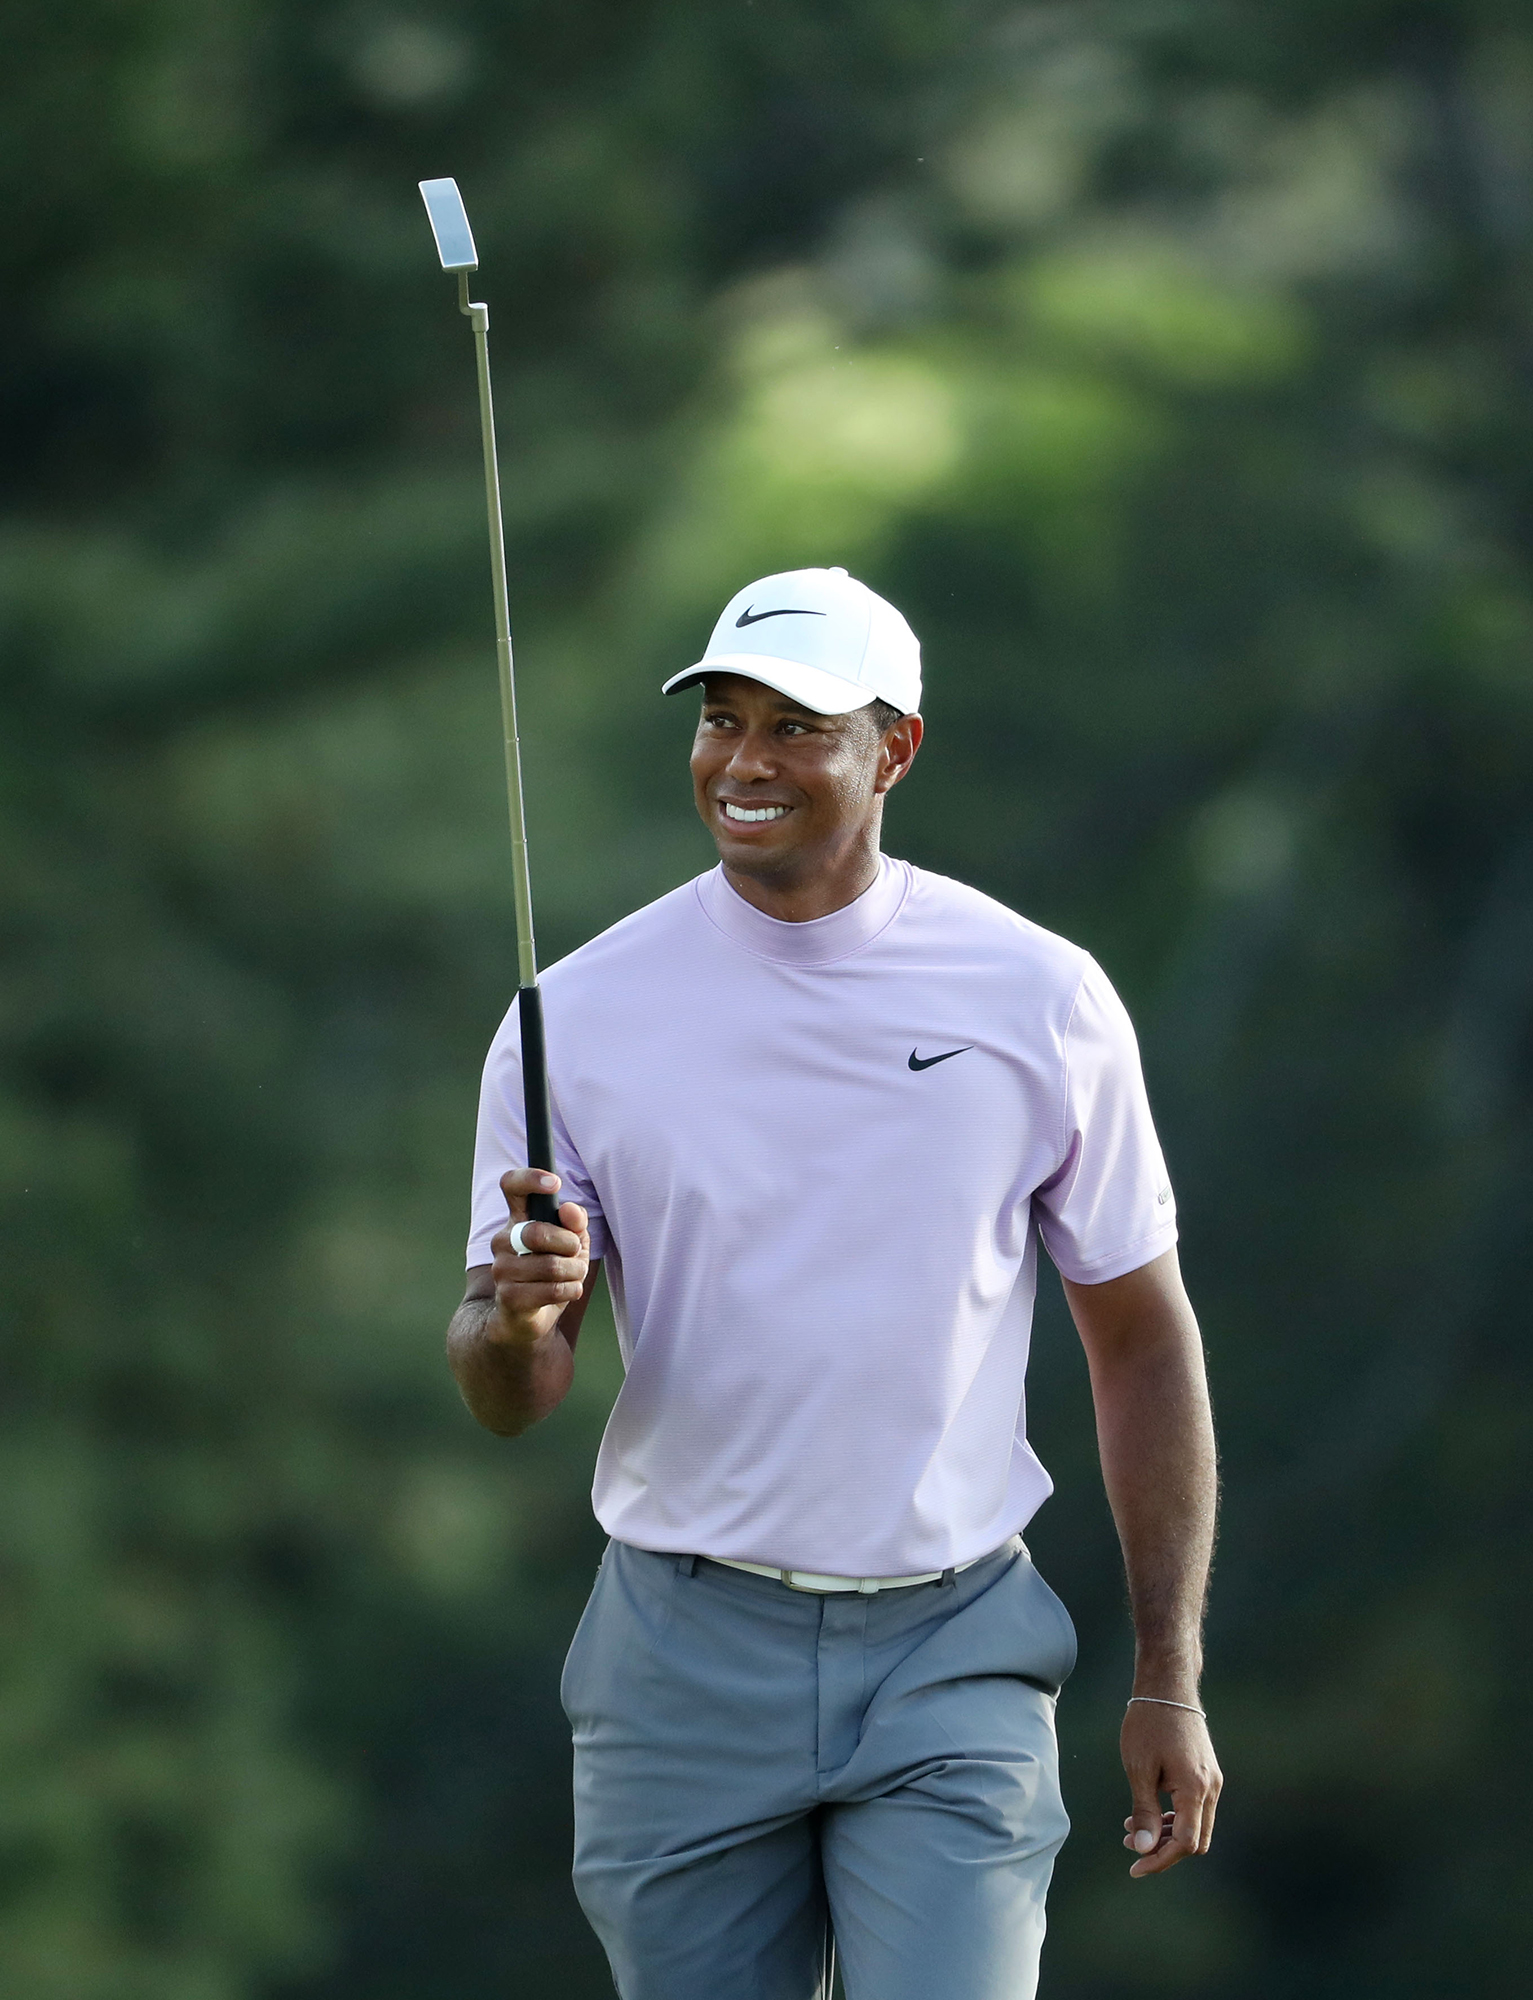 Tiger Woods walks up to the 18th green during the third round of the Masters at Augusta National Golf Club in Augusta, Ga., on Saturday, April 13, 2019. (Jason Getz/Atlanta Journal-Constitution/TNS)